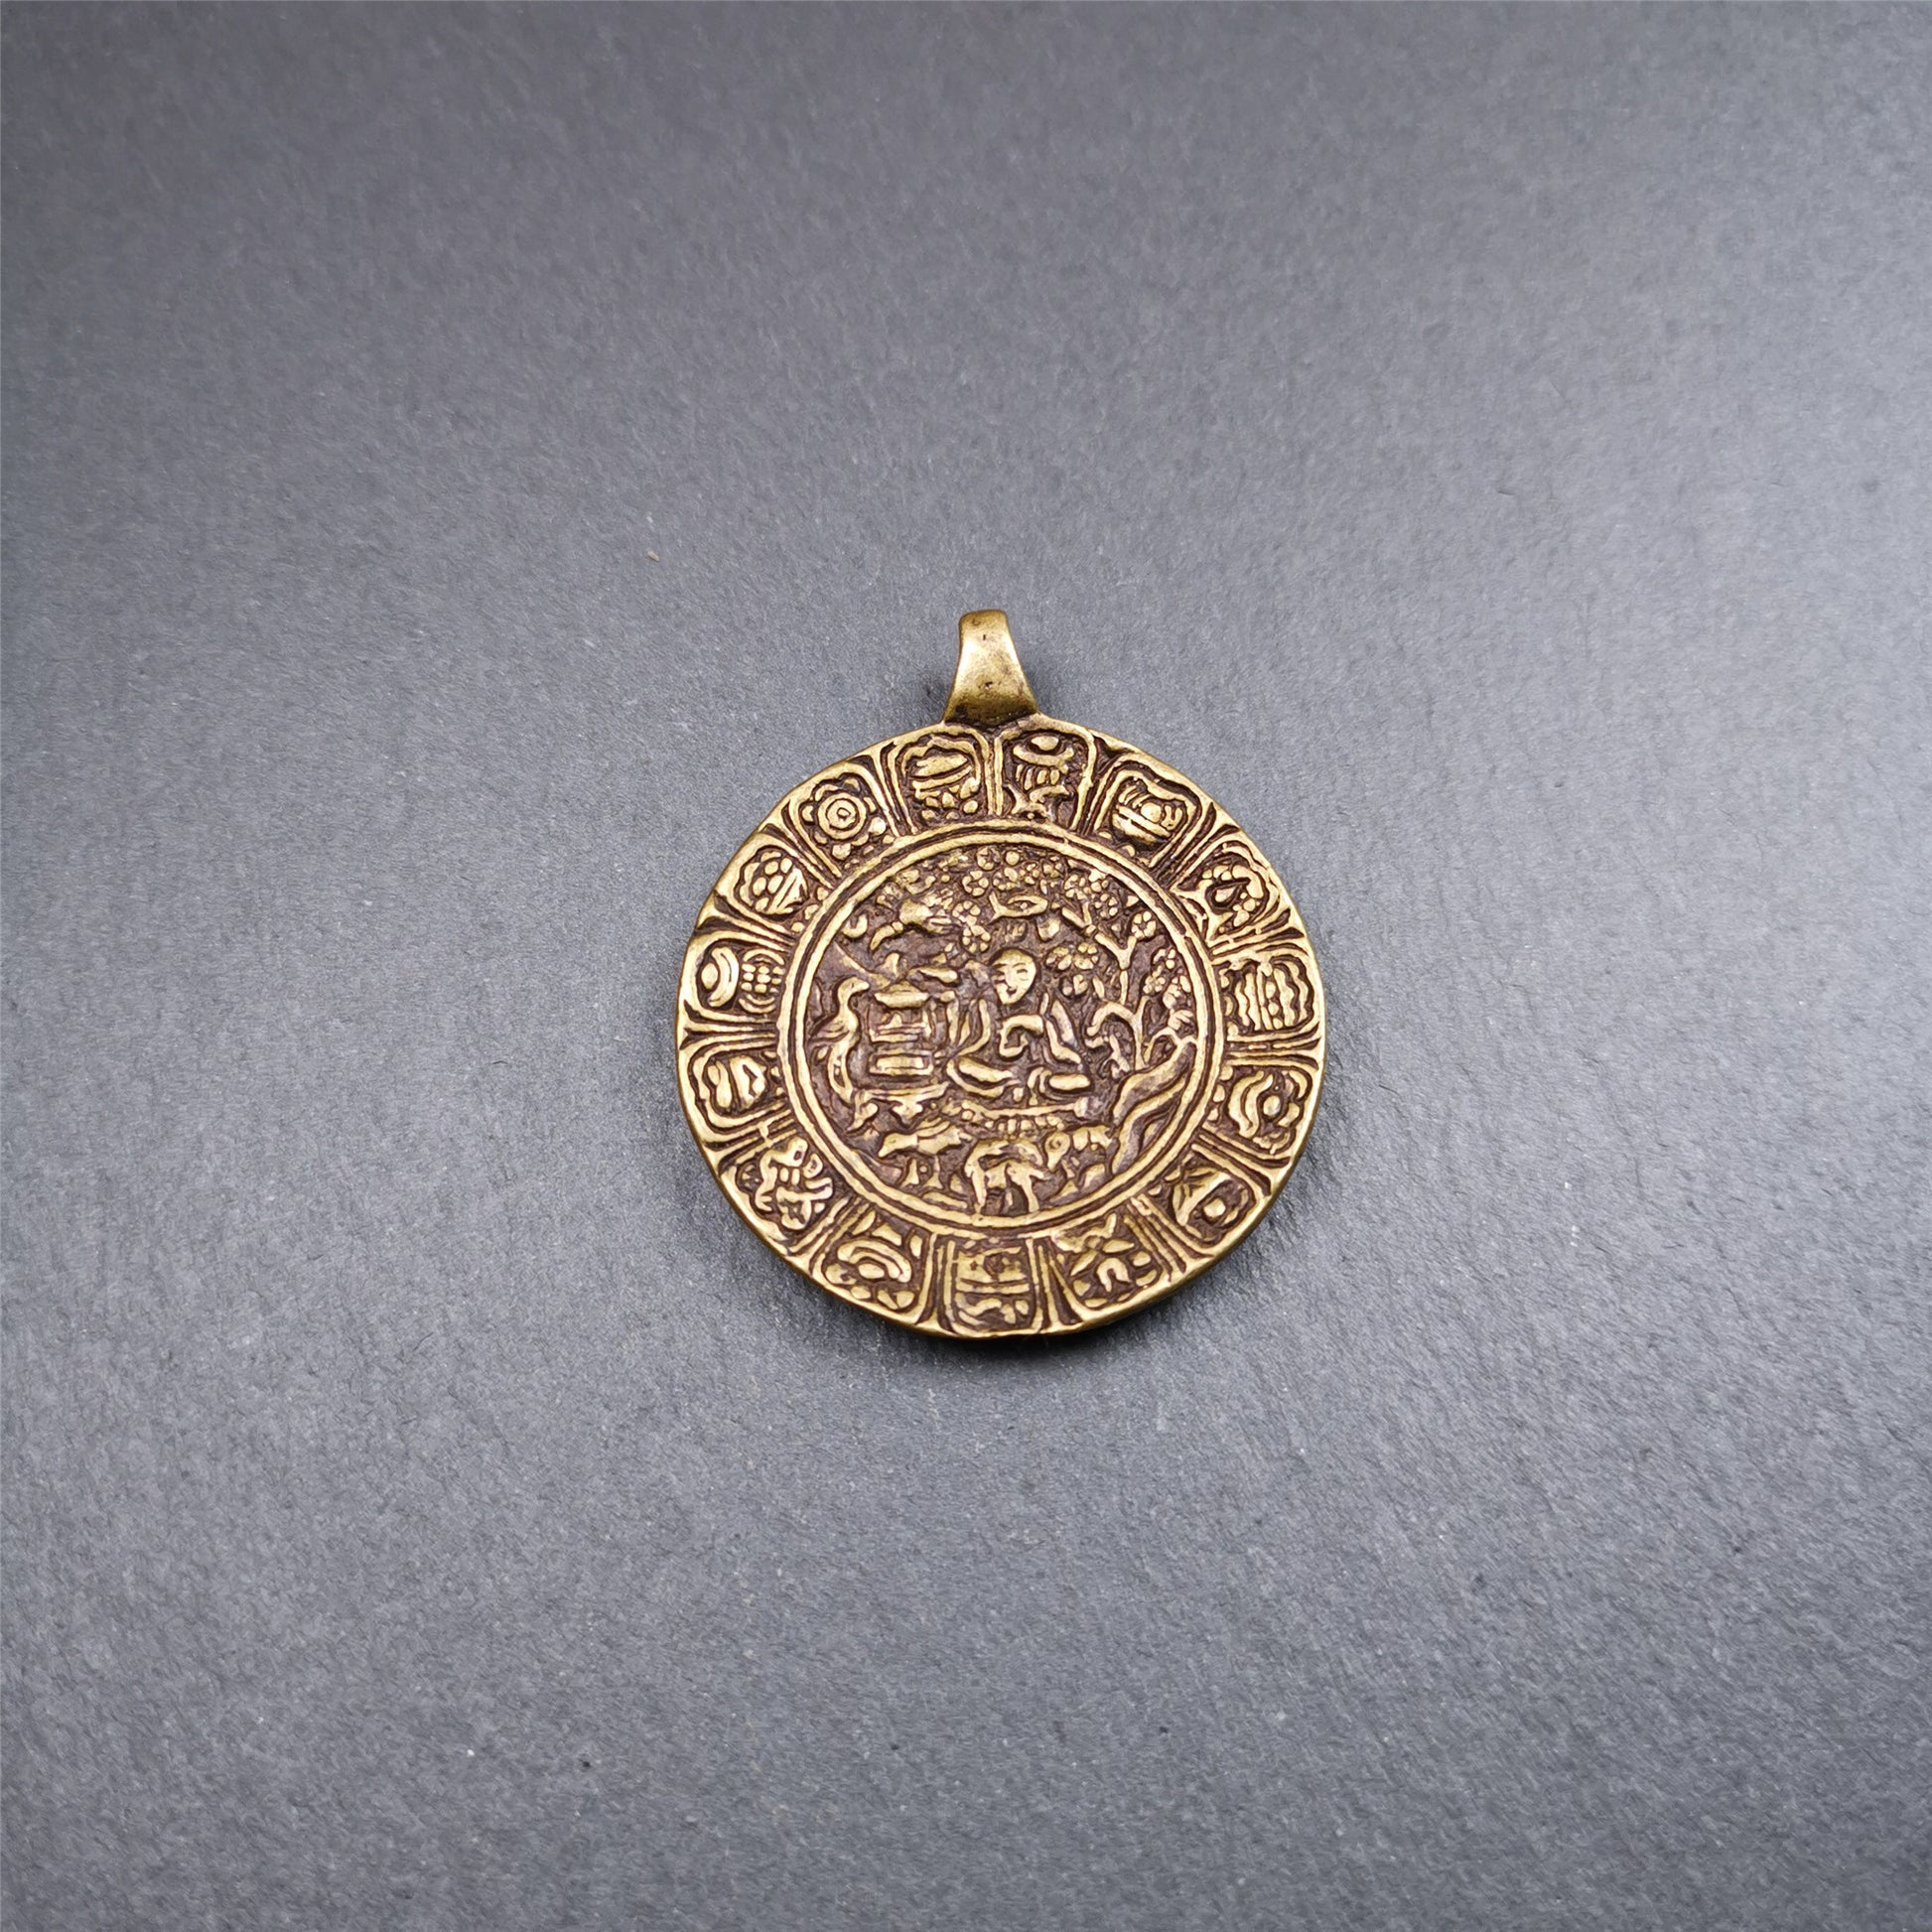 This Longevity Badge was handmade by Tibetan craftsmen and come from Hepo Town, Baiyu County, Tibet. It is made of brass,round shape,the theme is the god of longevity,surrounded by the symbols of Ashtamangala.